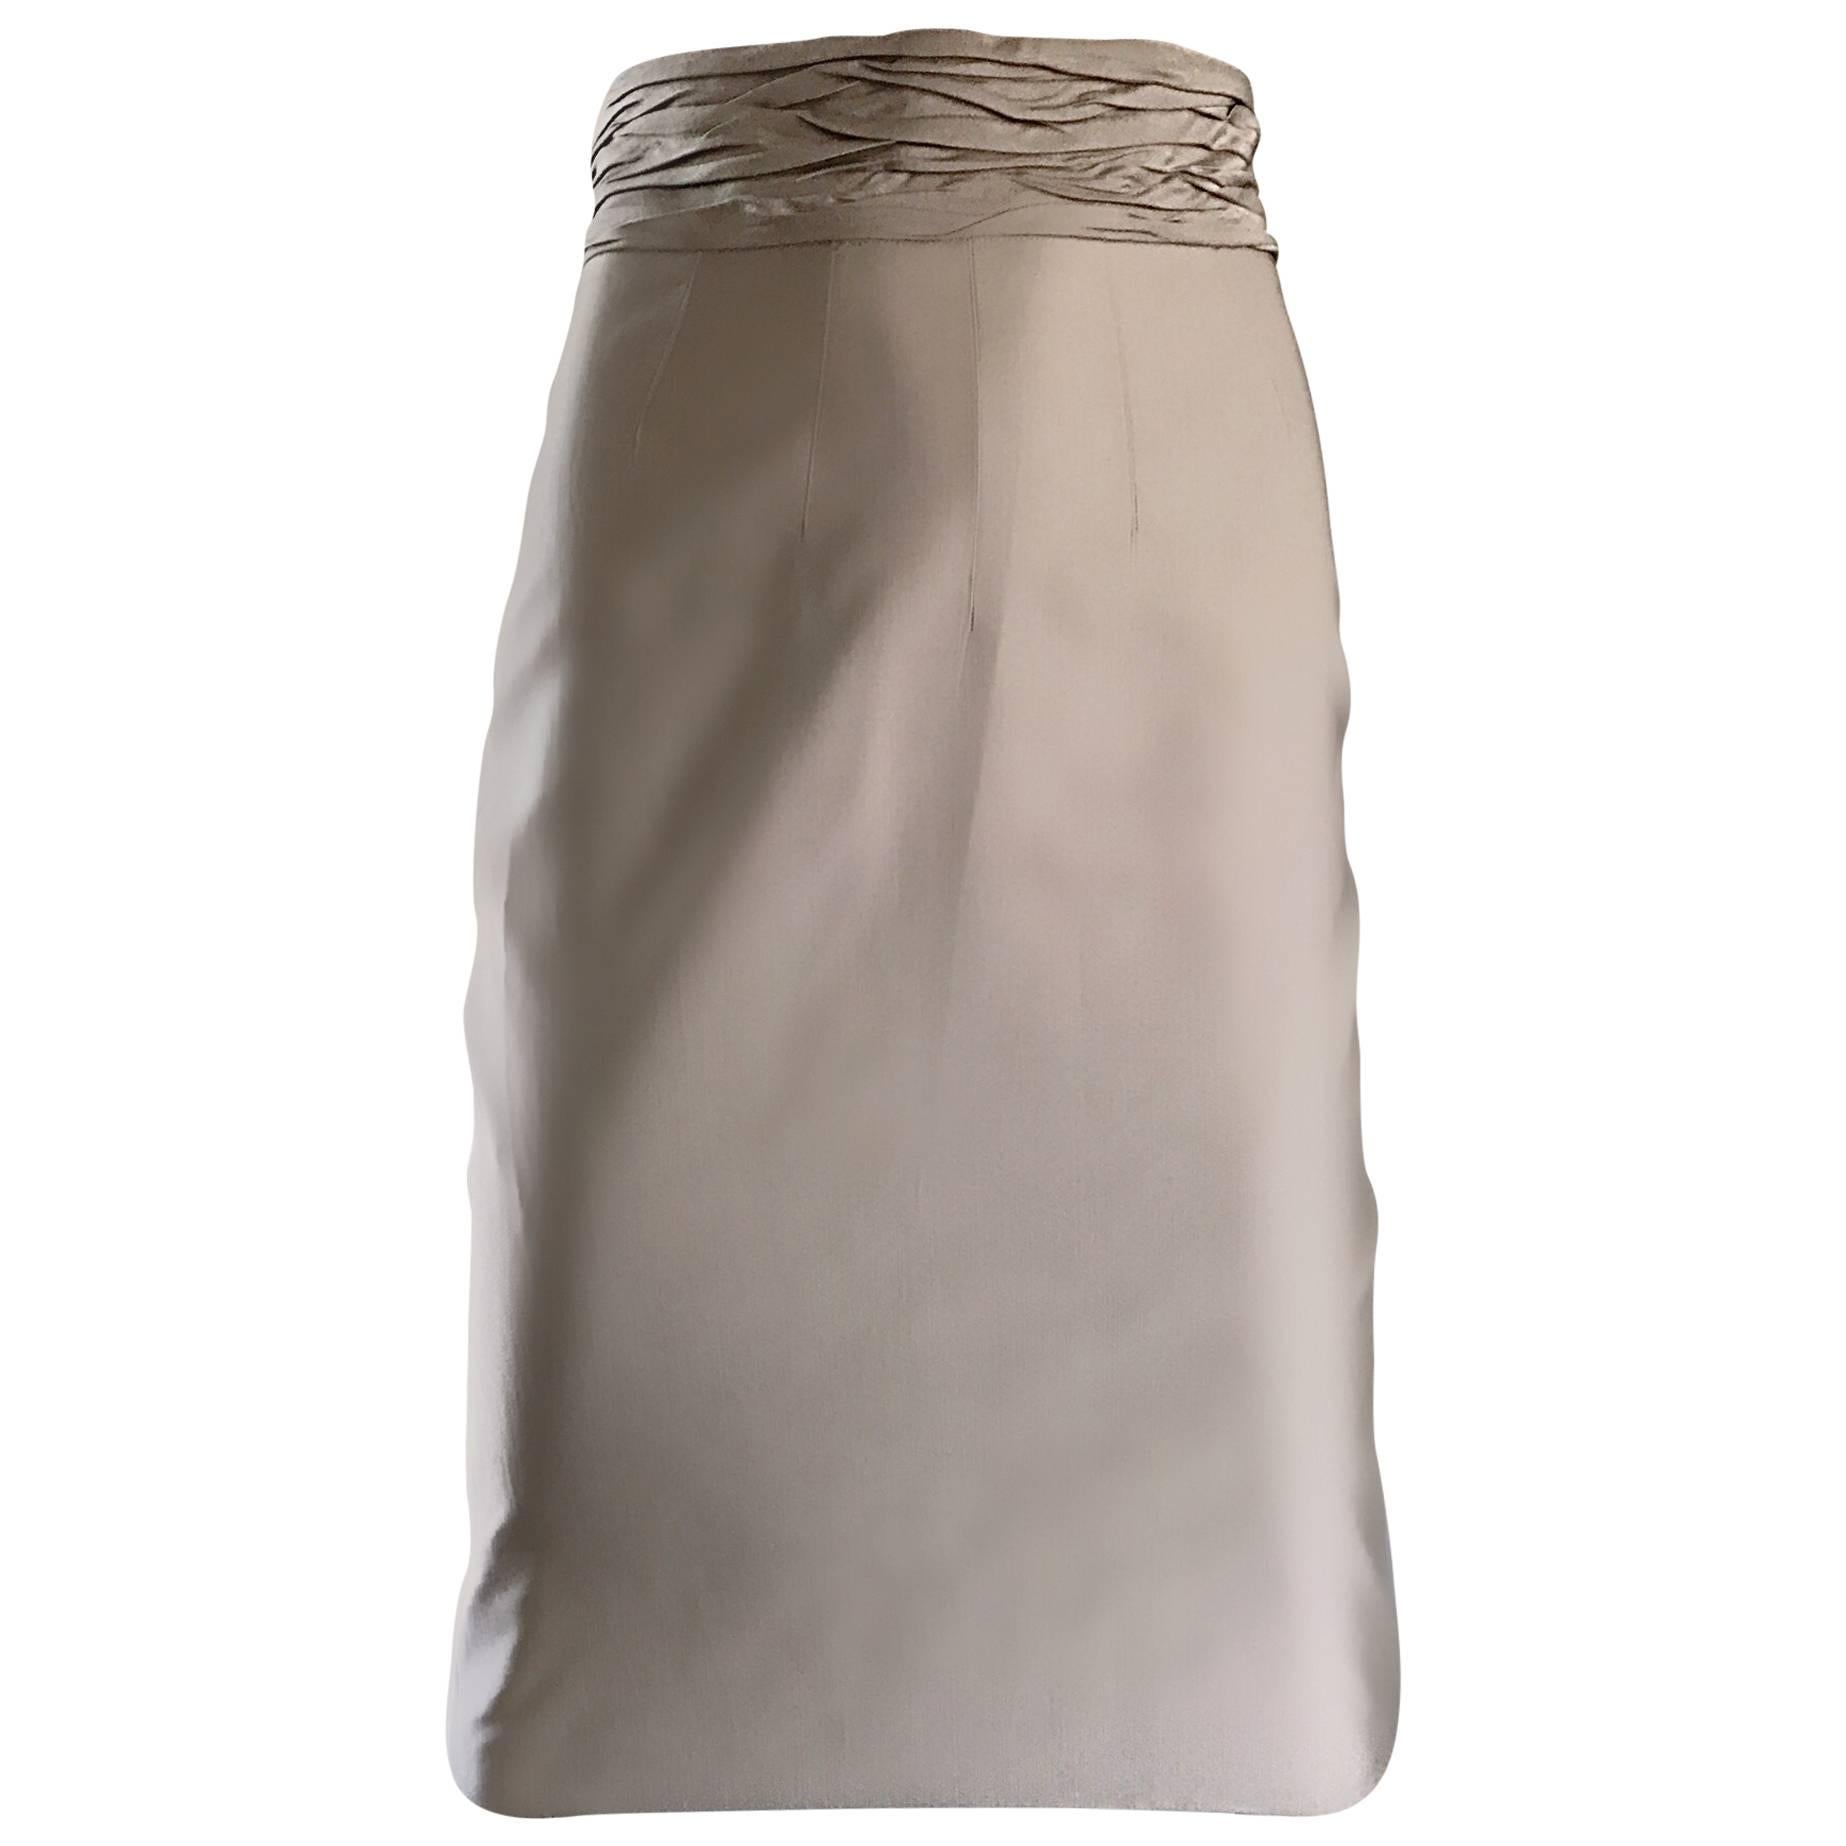 Prada Vintage 1990s Runway Khaki High Waisted 90s Fitted Pencil Skirt  For Sale